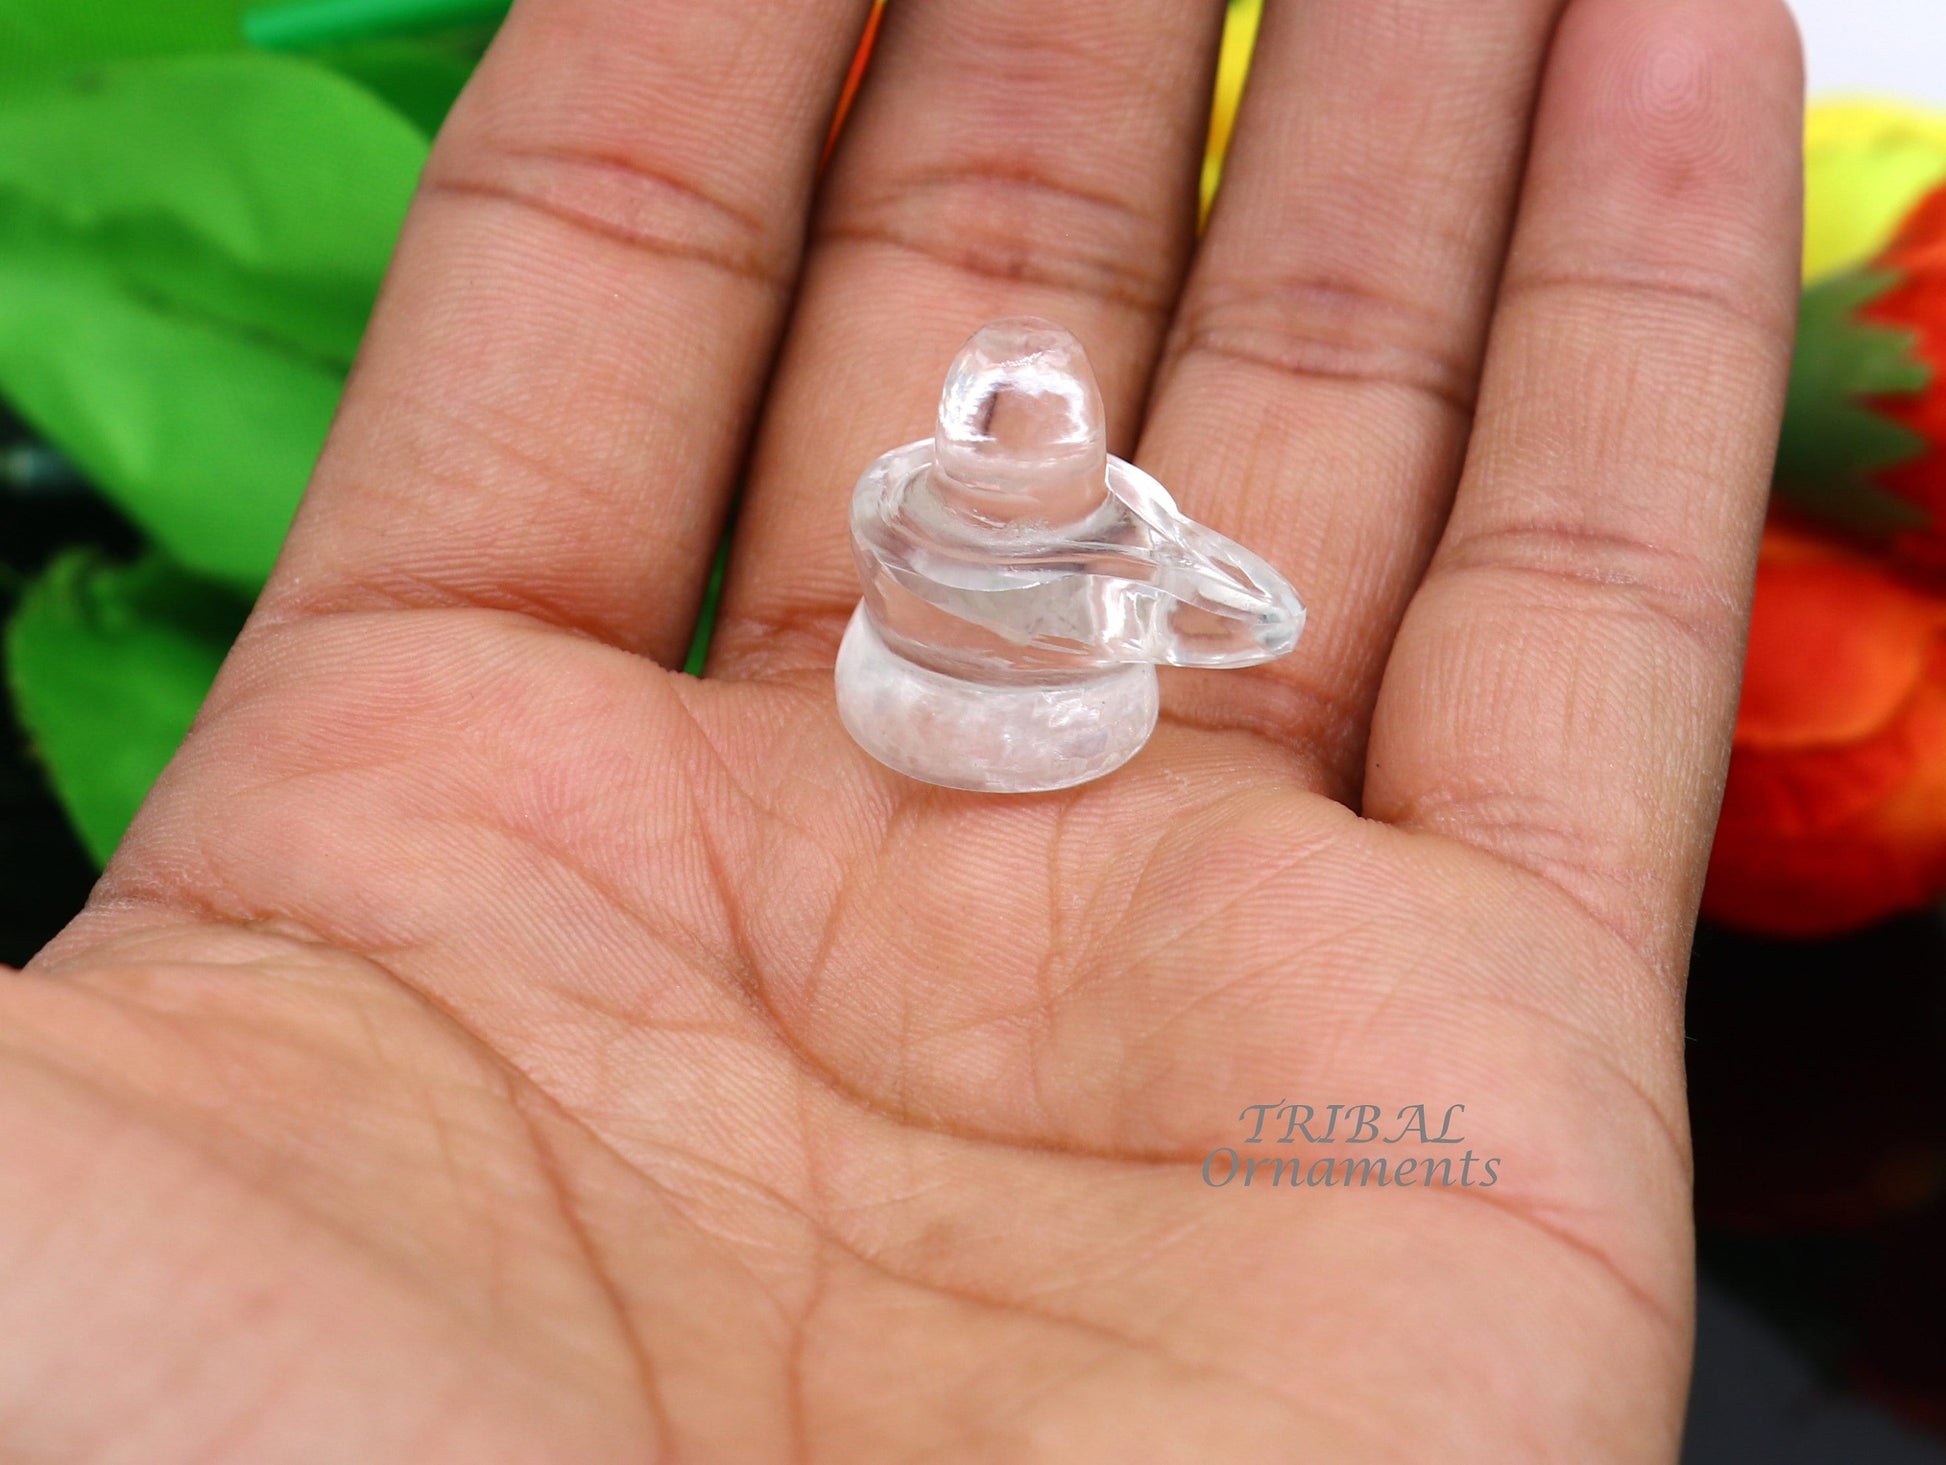 Amazing Natural sphatik crystal stone divine lor shiva lingam statue, amazing sphatik lingam puja article for wealth and prosperity stna21 - TRIBAL ORNAMENTS